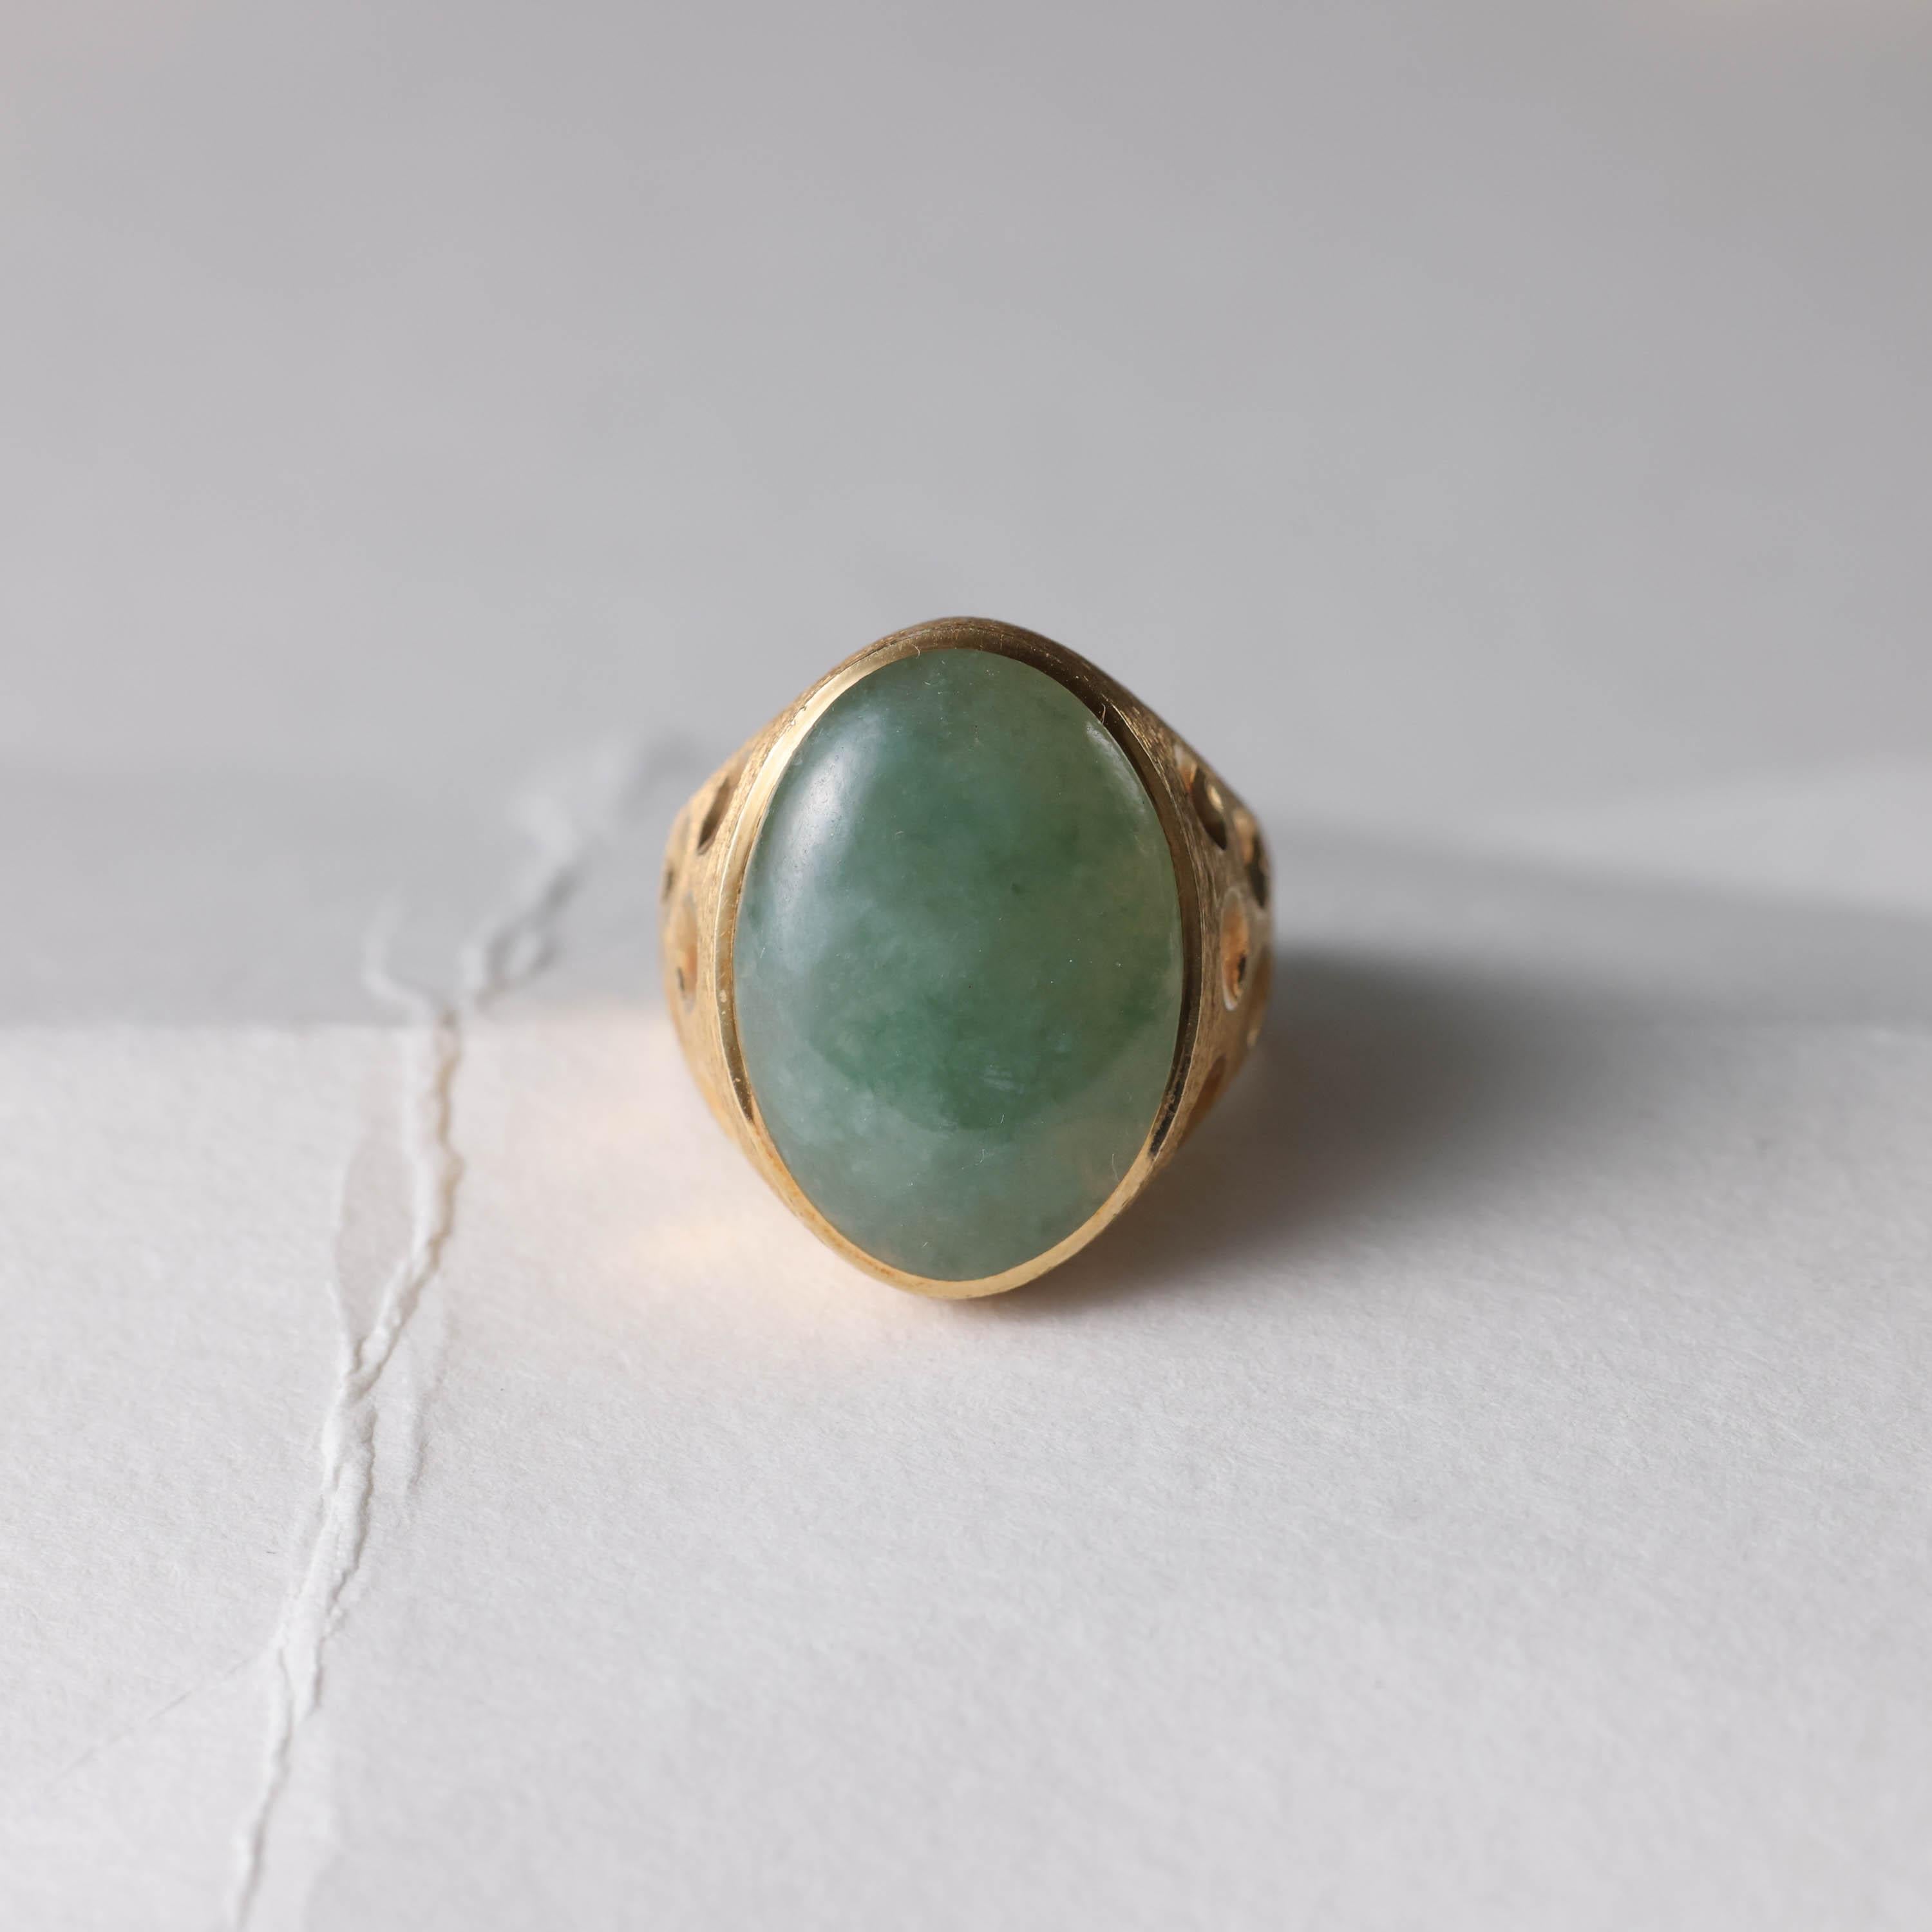 Modern Midcentury Jadeite Men's Ring Certified Untreated, Eccentric Lux Quality For Sale